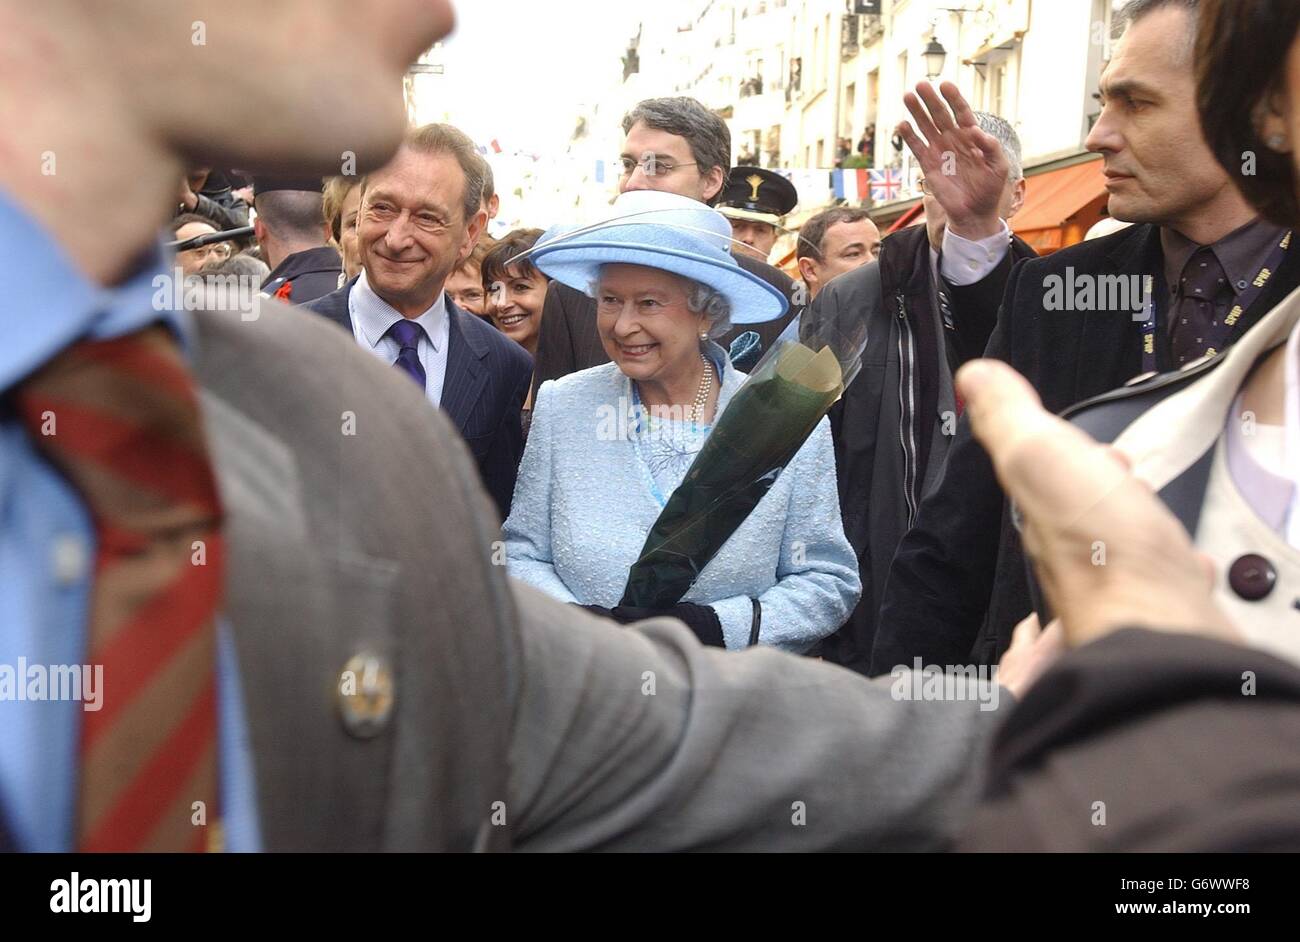 Britain's Queen Elizabeth II on a walkabout outside Cerise Community Centre in Paris, during her official three-day state visit to France. The monarch's three-day stay in the country marks 100 years of the Anglo-French Entente Cordiale agreement. Stock Photo